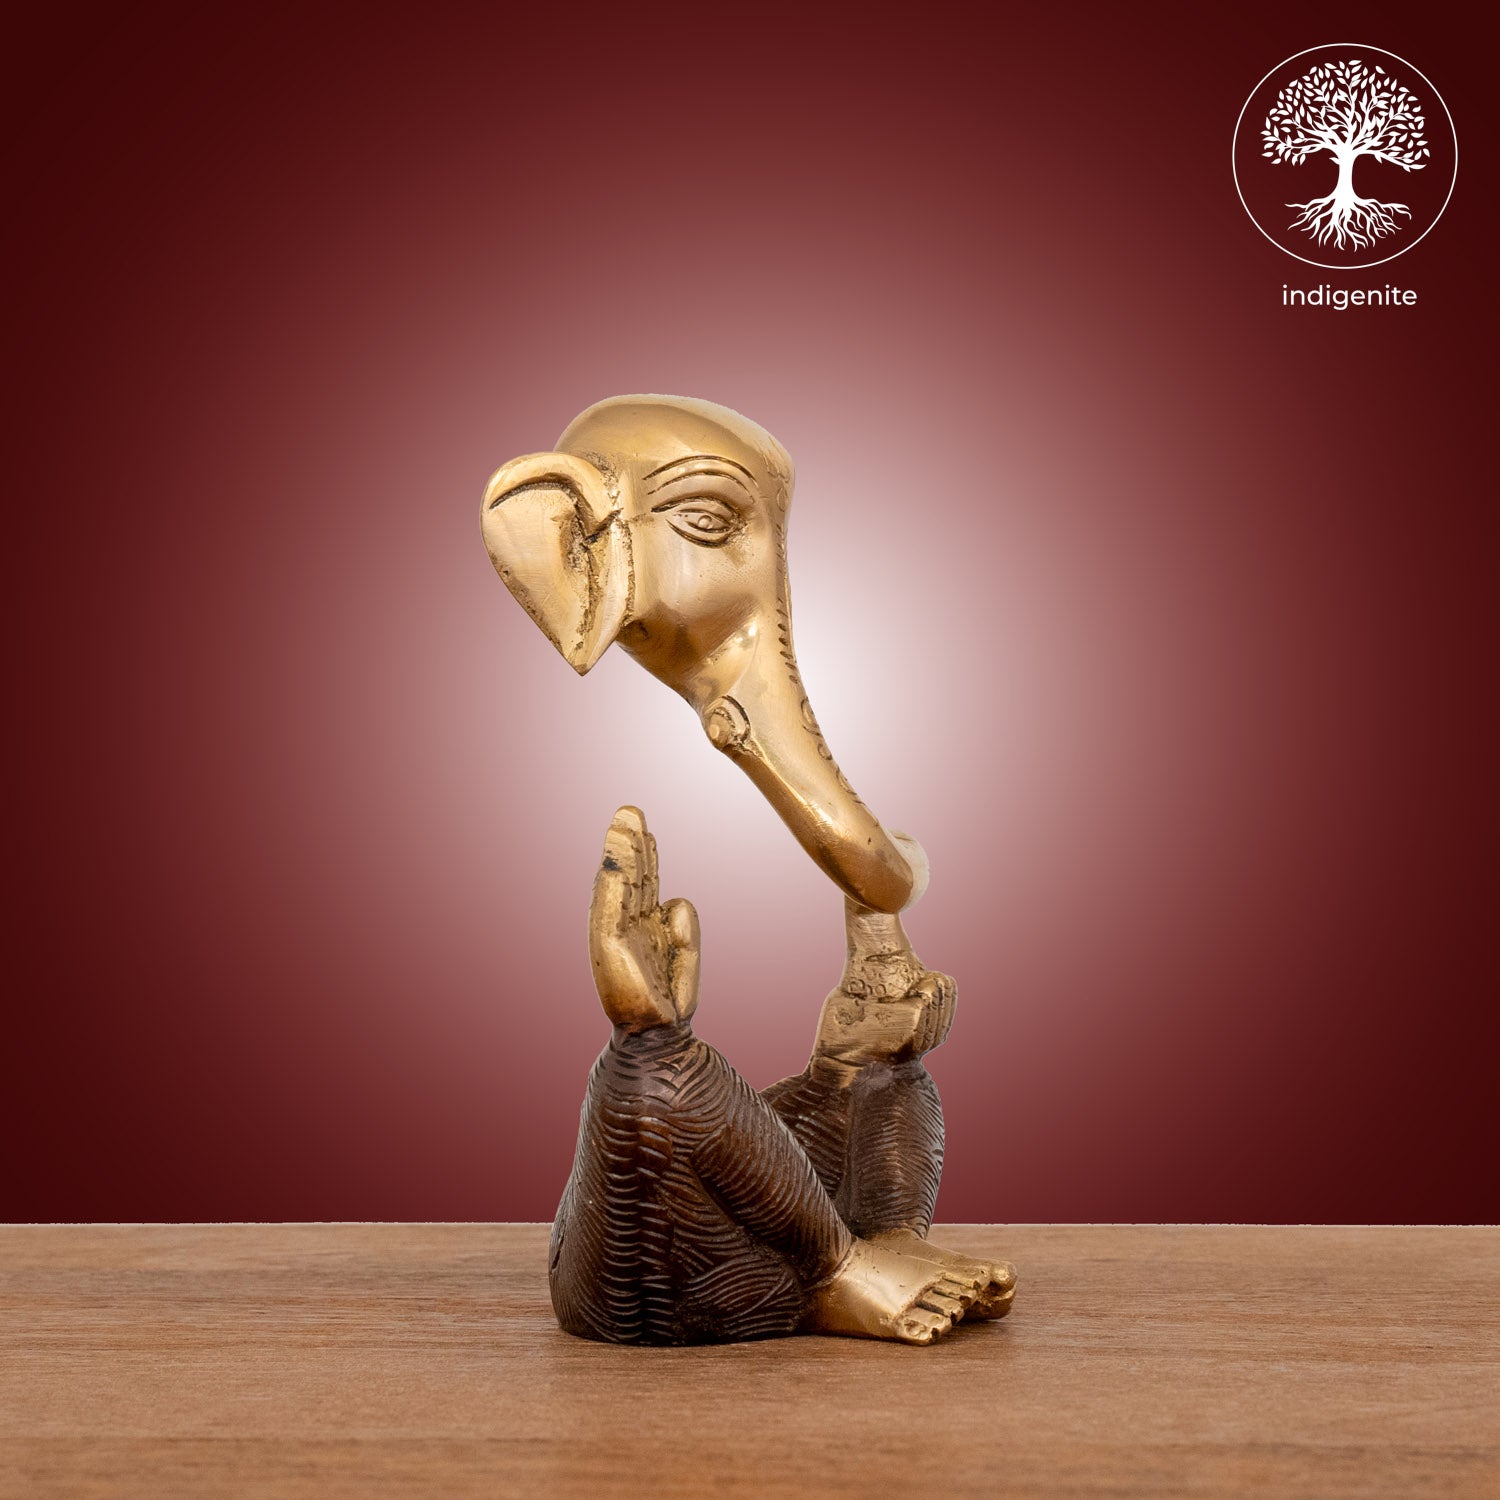 Modern Lord Ganesh Idol - Brass Statue in Brown and Gold Hues |6 Inch